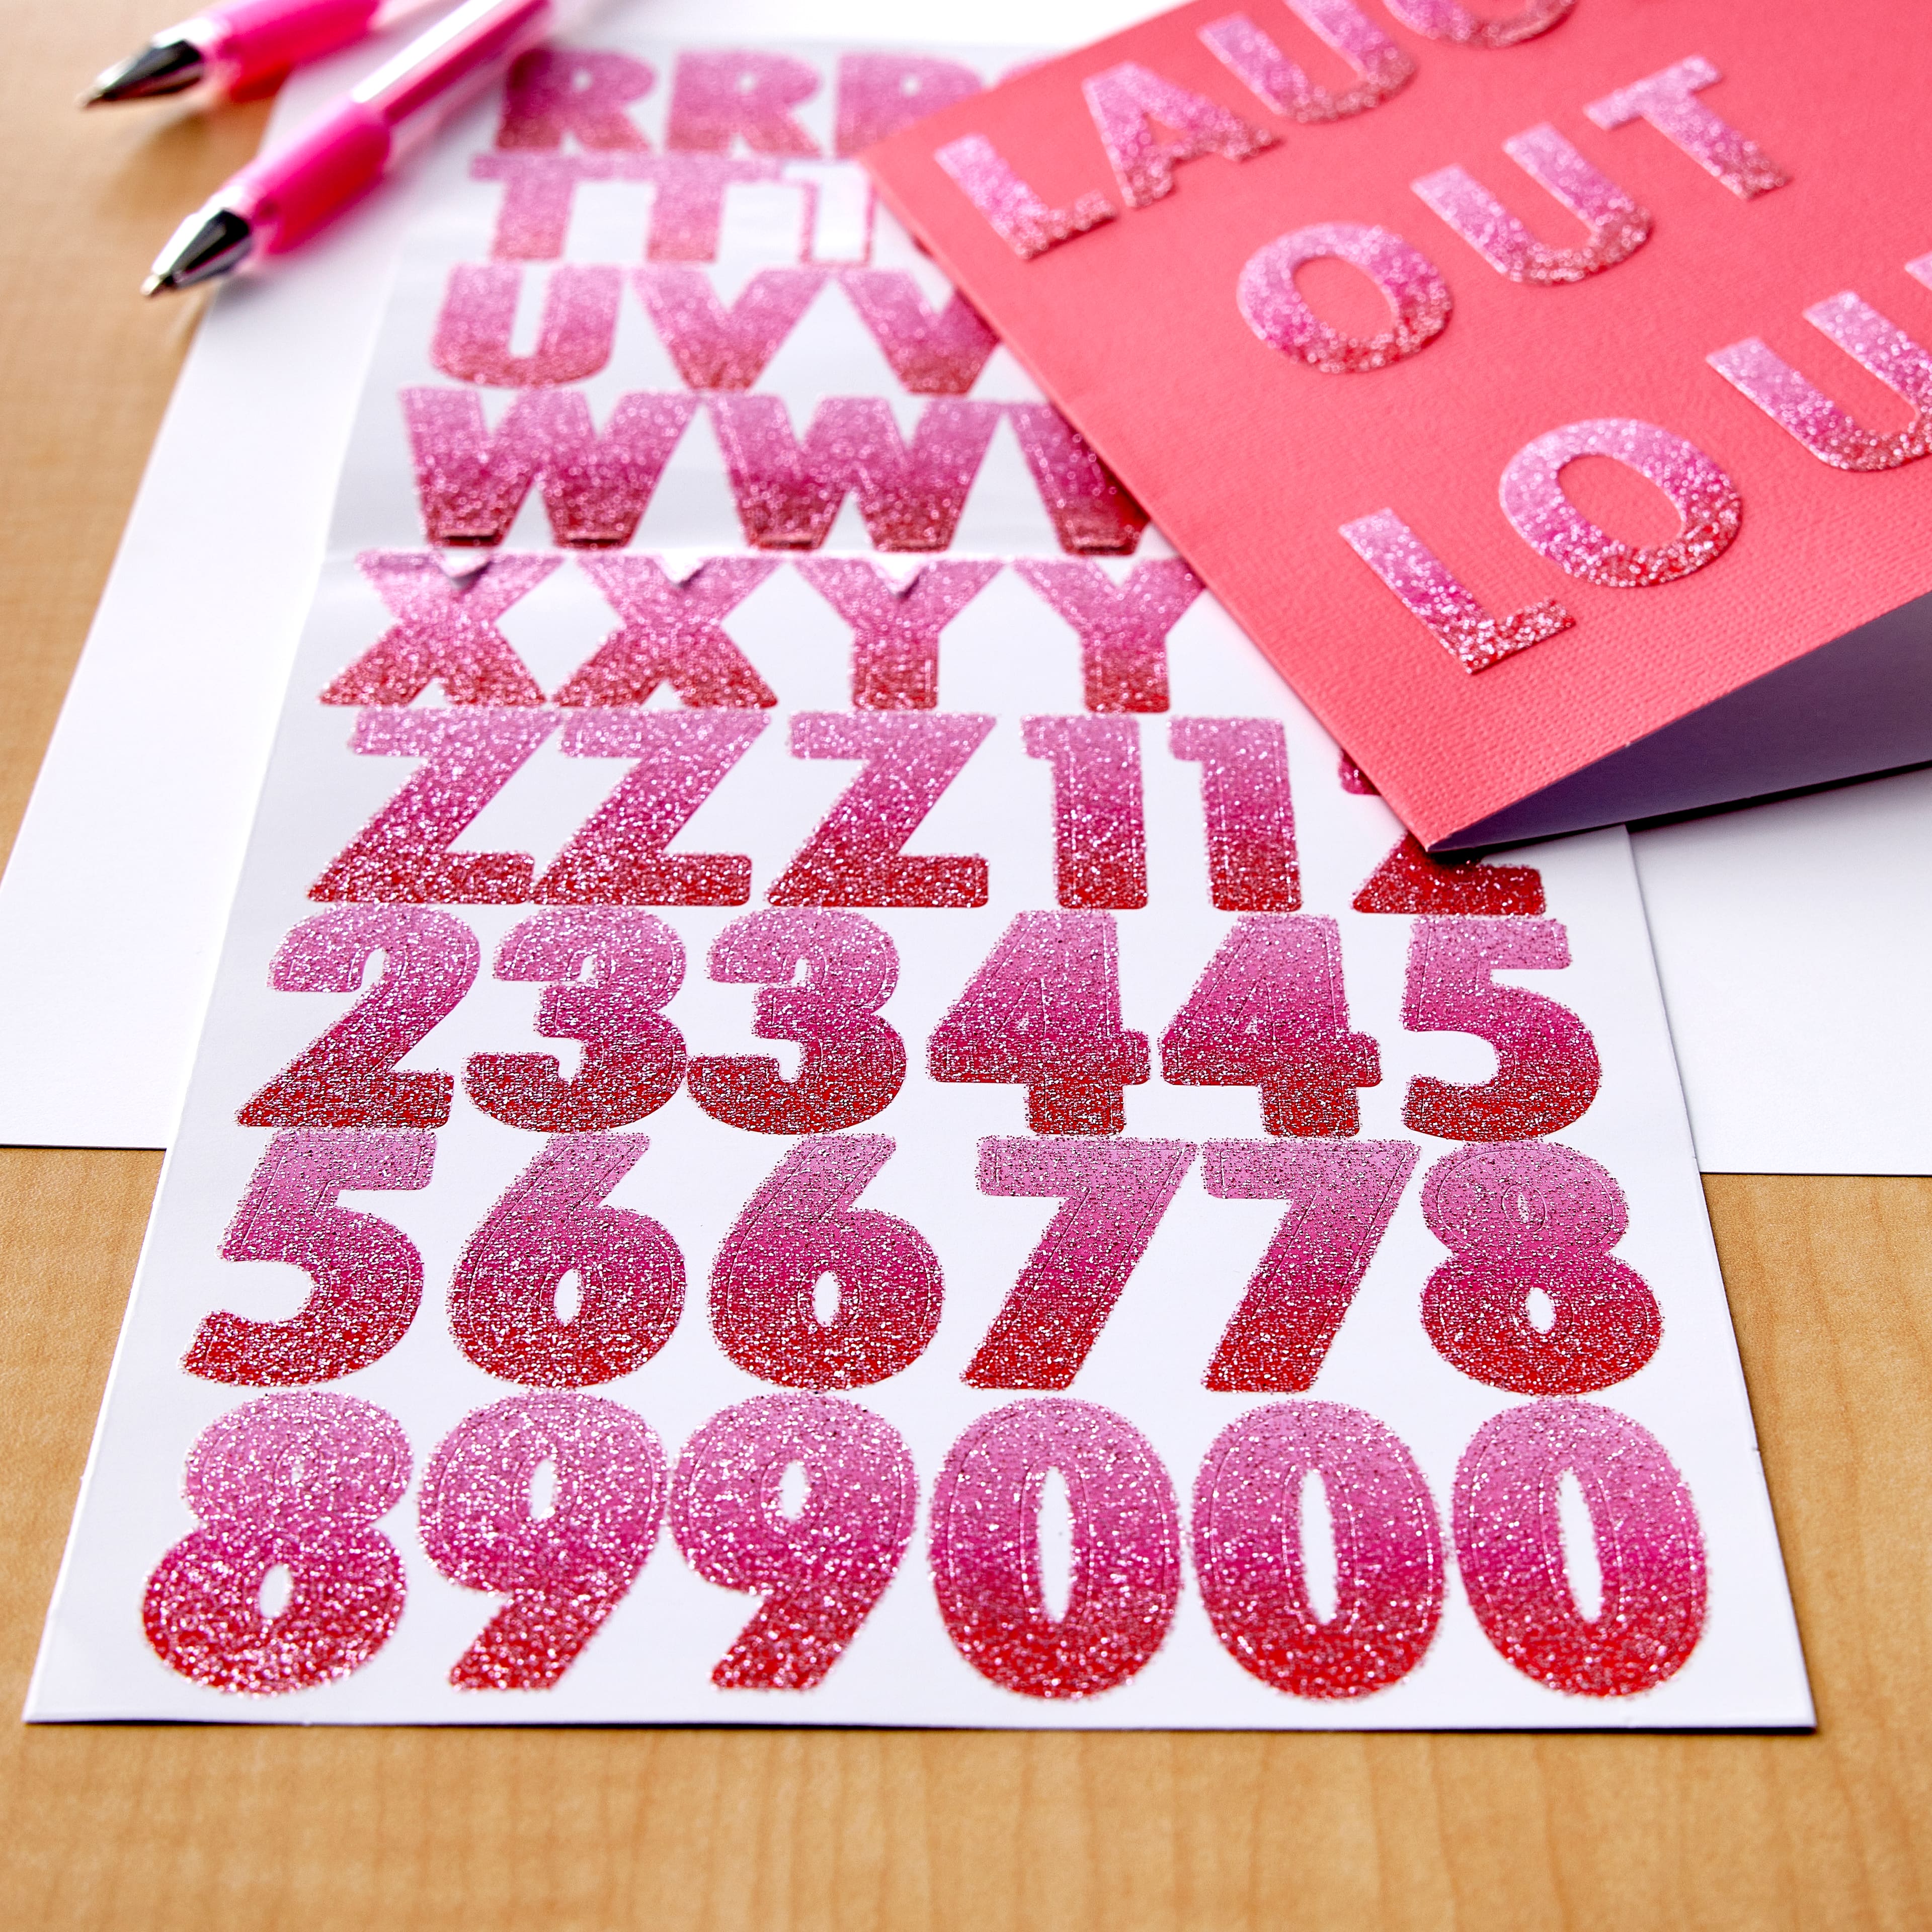 12 Packs: 112 ct. (1,344 total) Glitter Pink Ombre Alphabet Stickers by  Recollections™